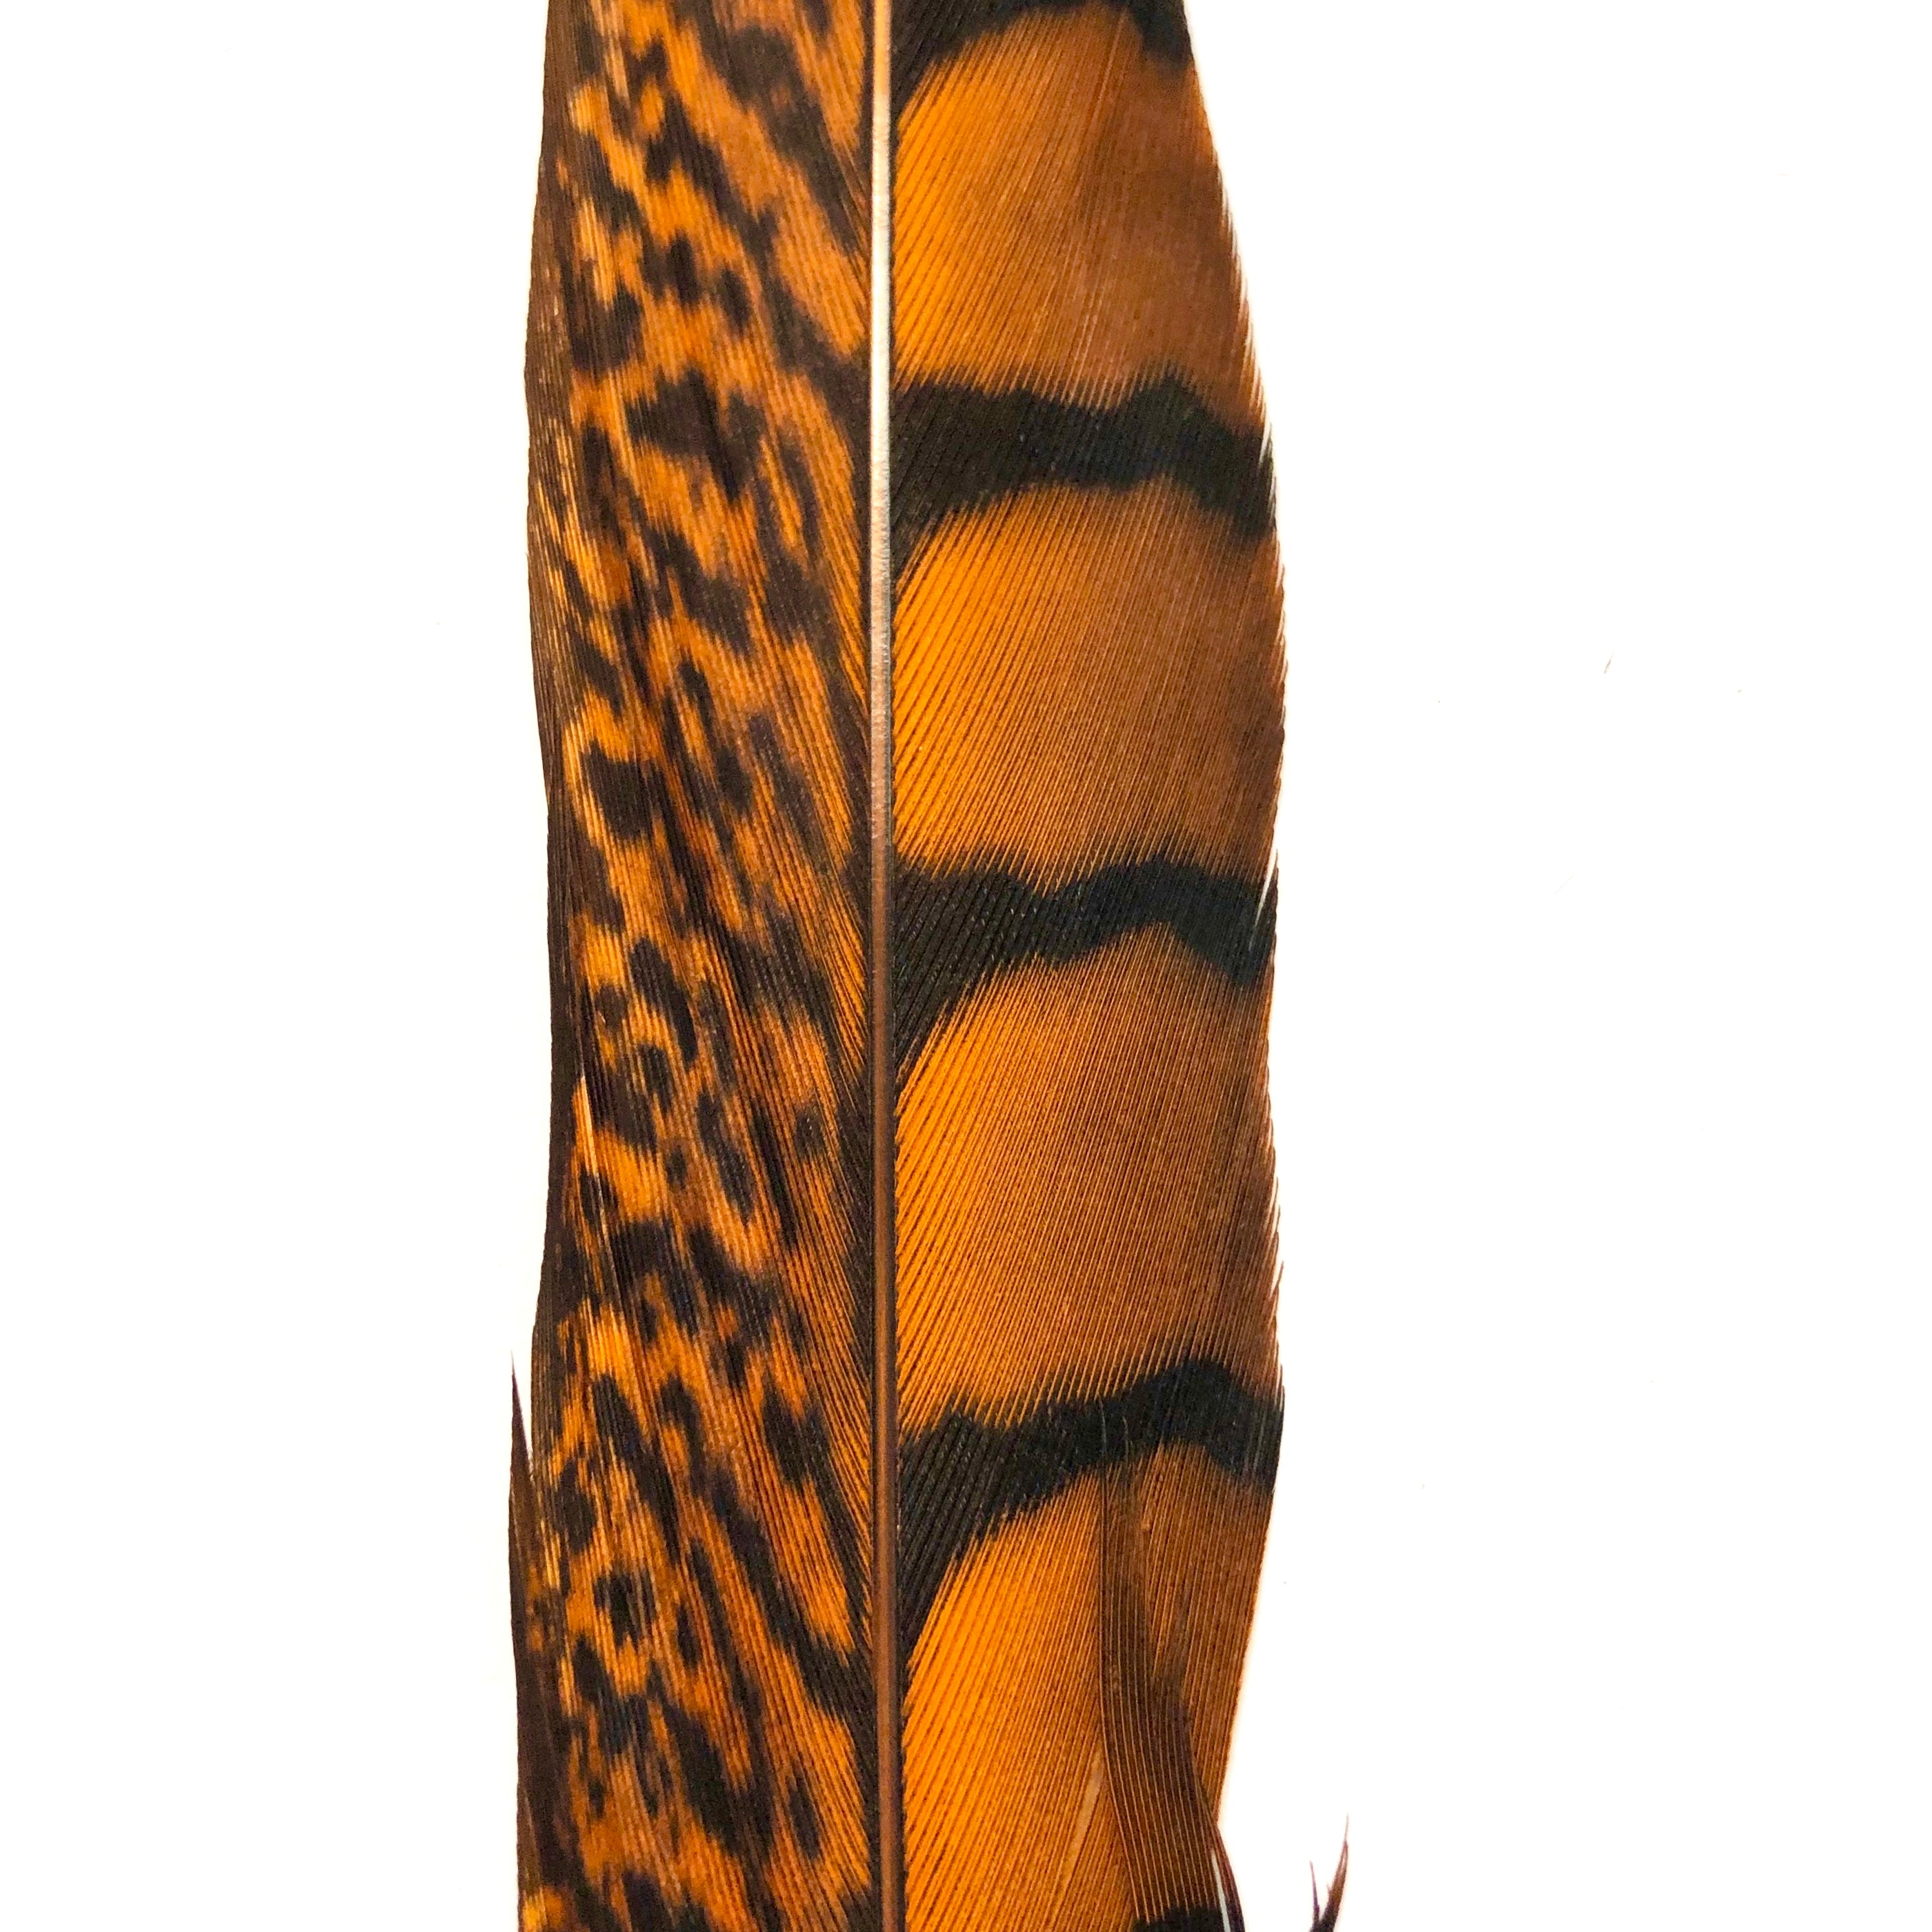 10" to 20" Lady Amherst Pheasant Side Tail Feather - Orange ((SECONDS))